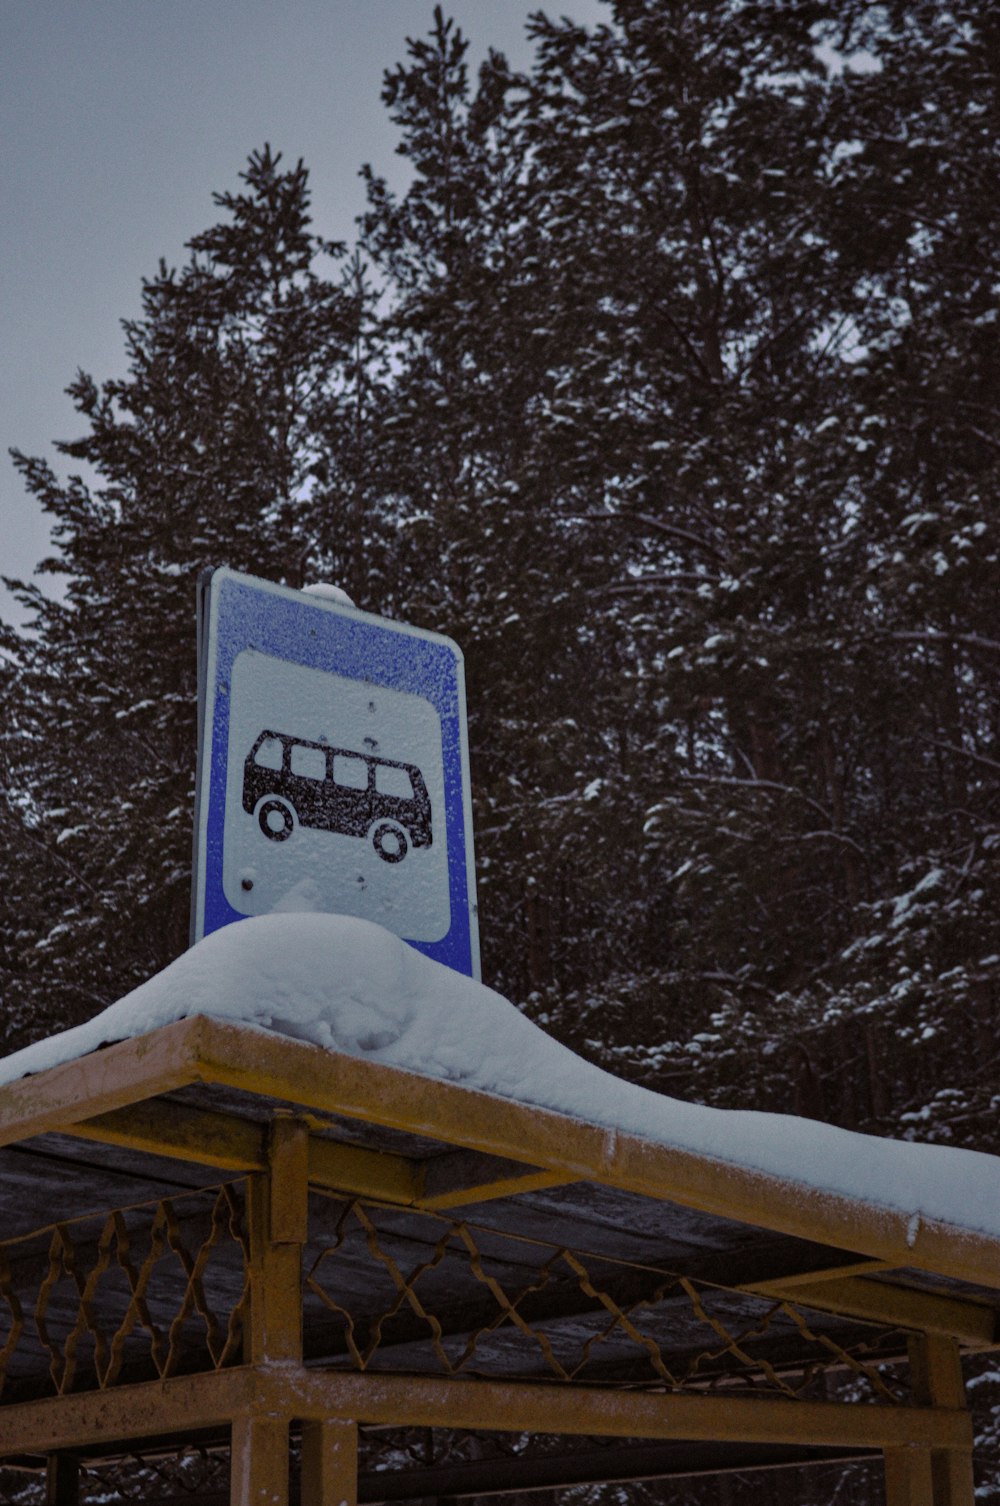 a bus stop sign covered in snow with trees in the background